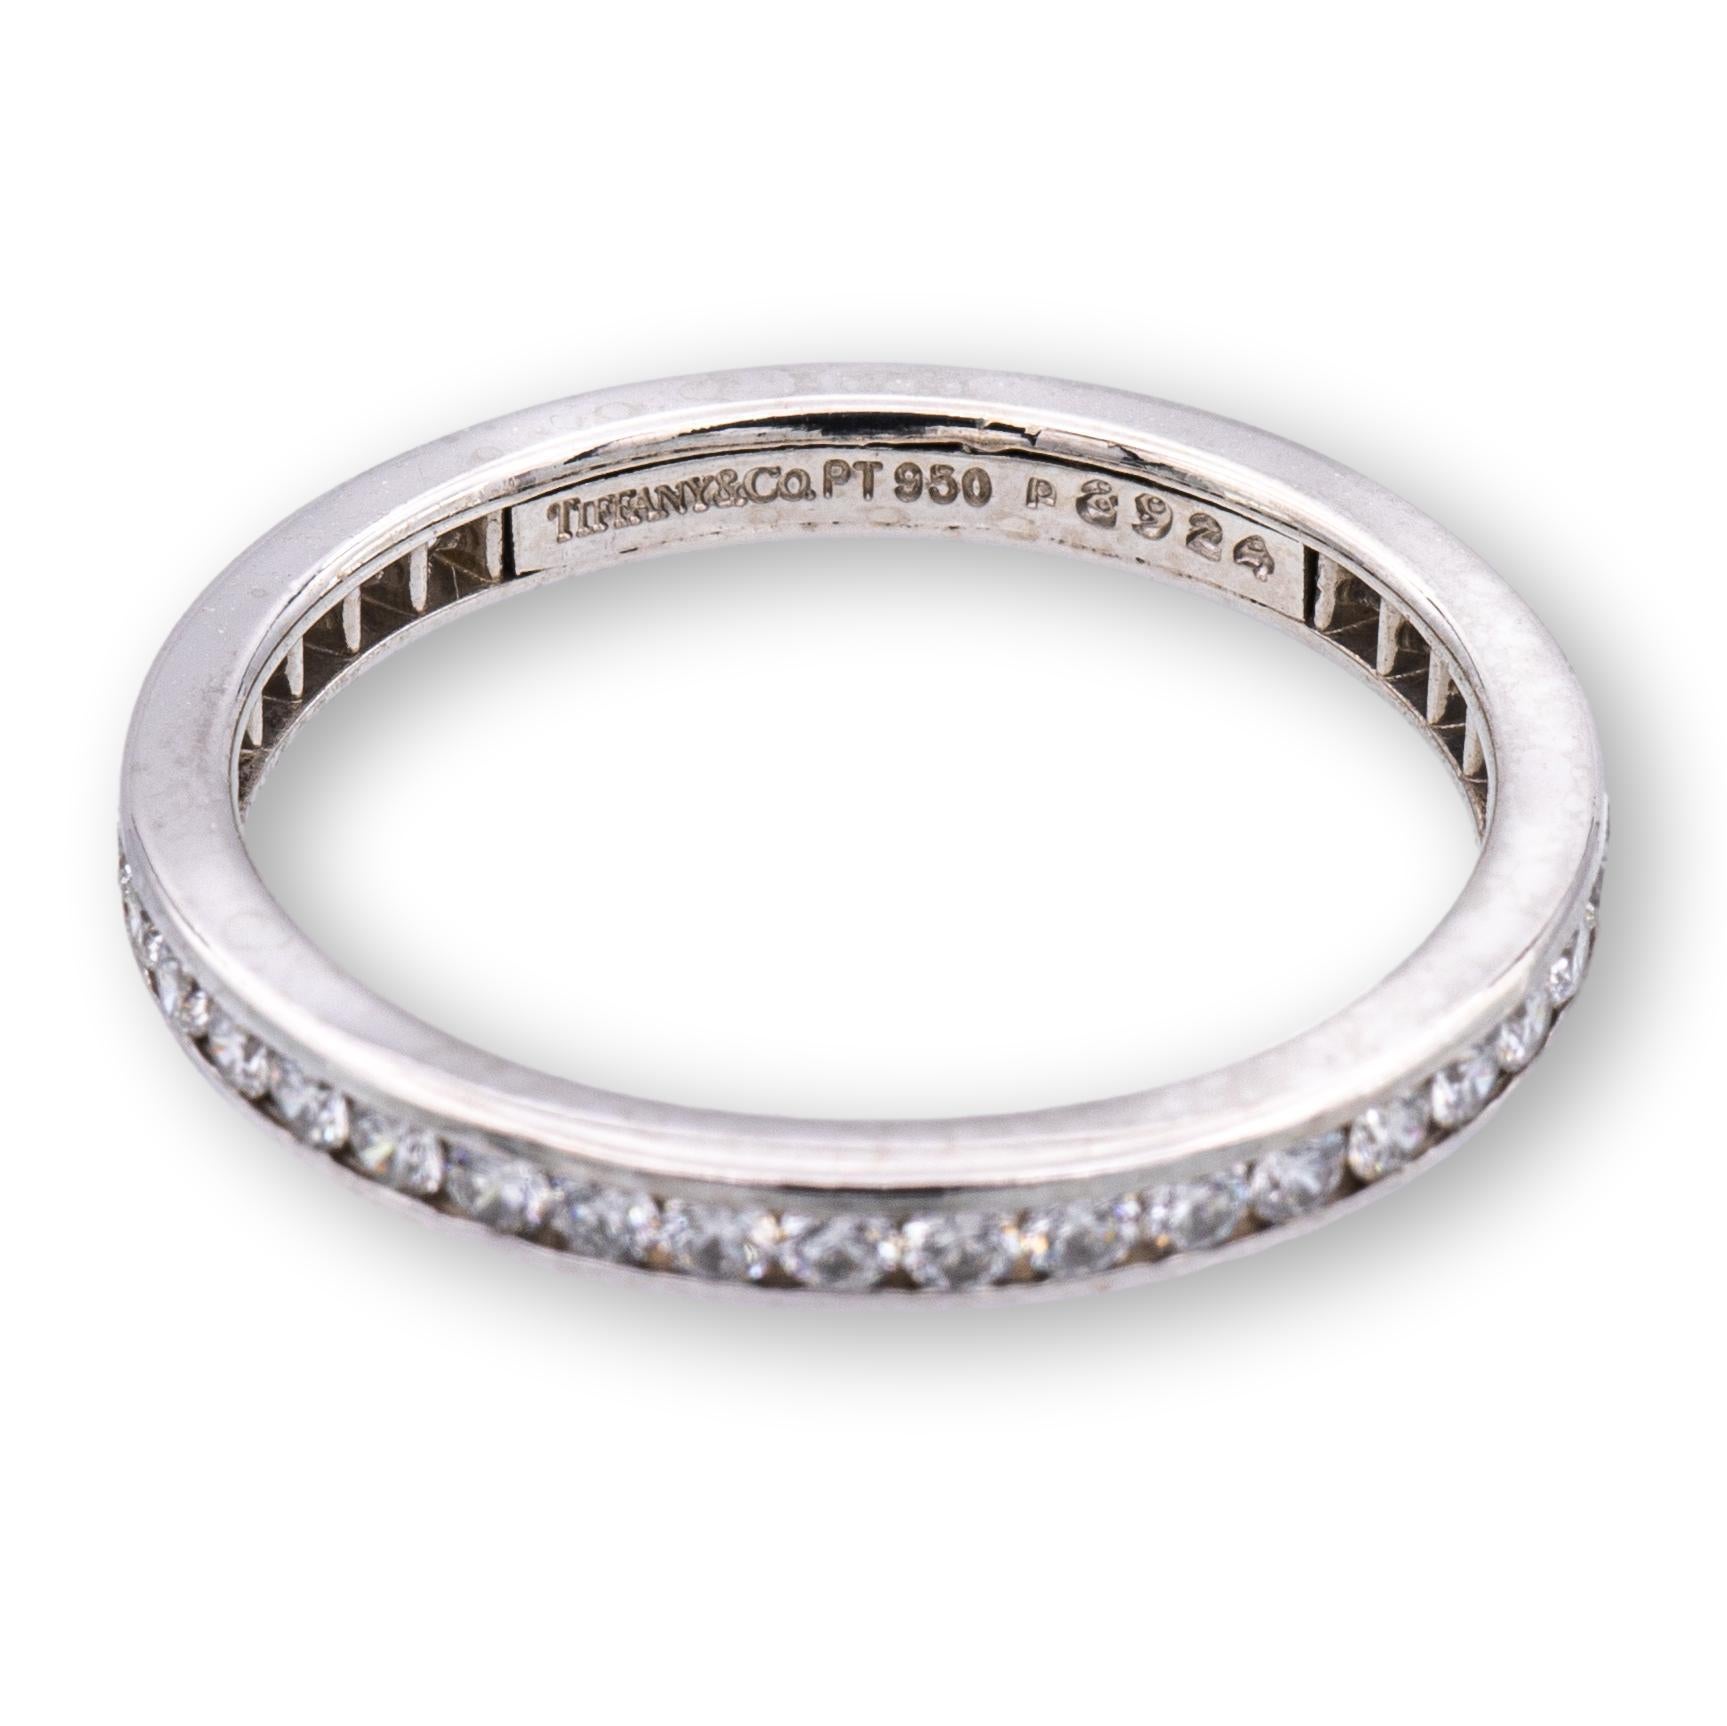 Tiffany & Co. wedding band ring finely crafted in platinum featuring 40 round brilliant cut diamonds weighing 0.40 carats total weight set all the way around in a full circle channel setting. Ring measures 2mm wide. Fully hallmarked with Tiffany